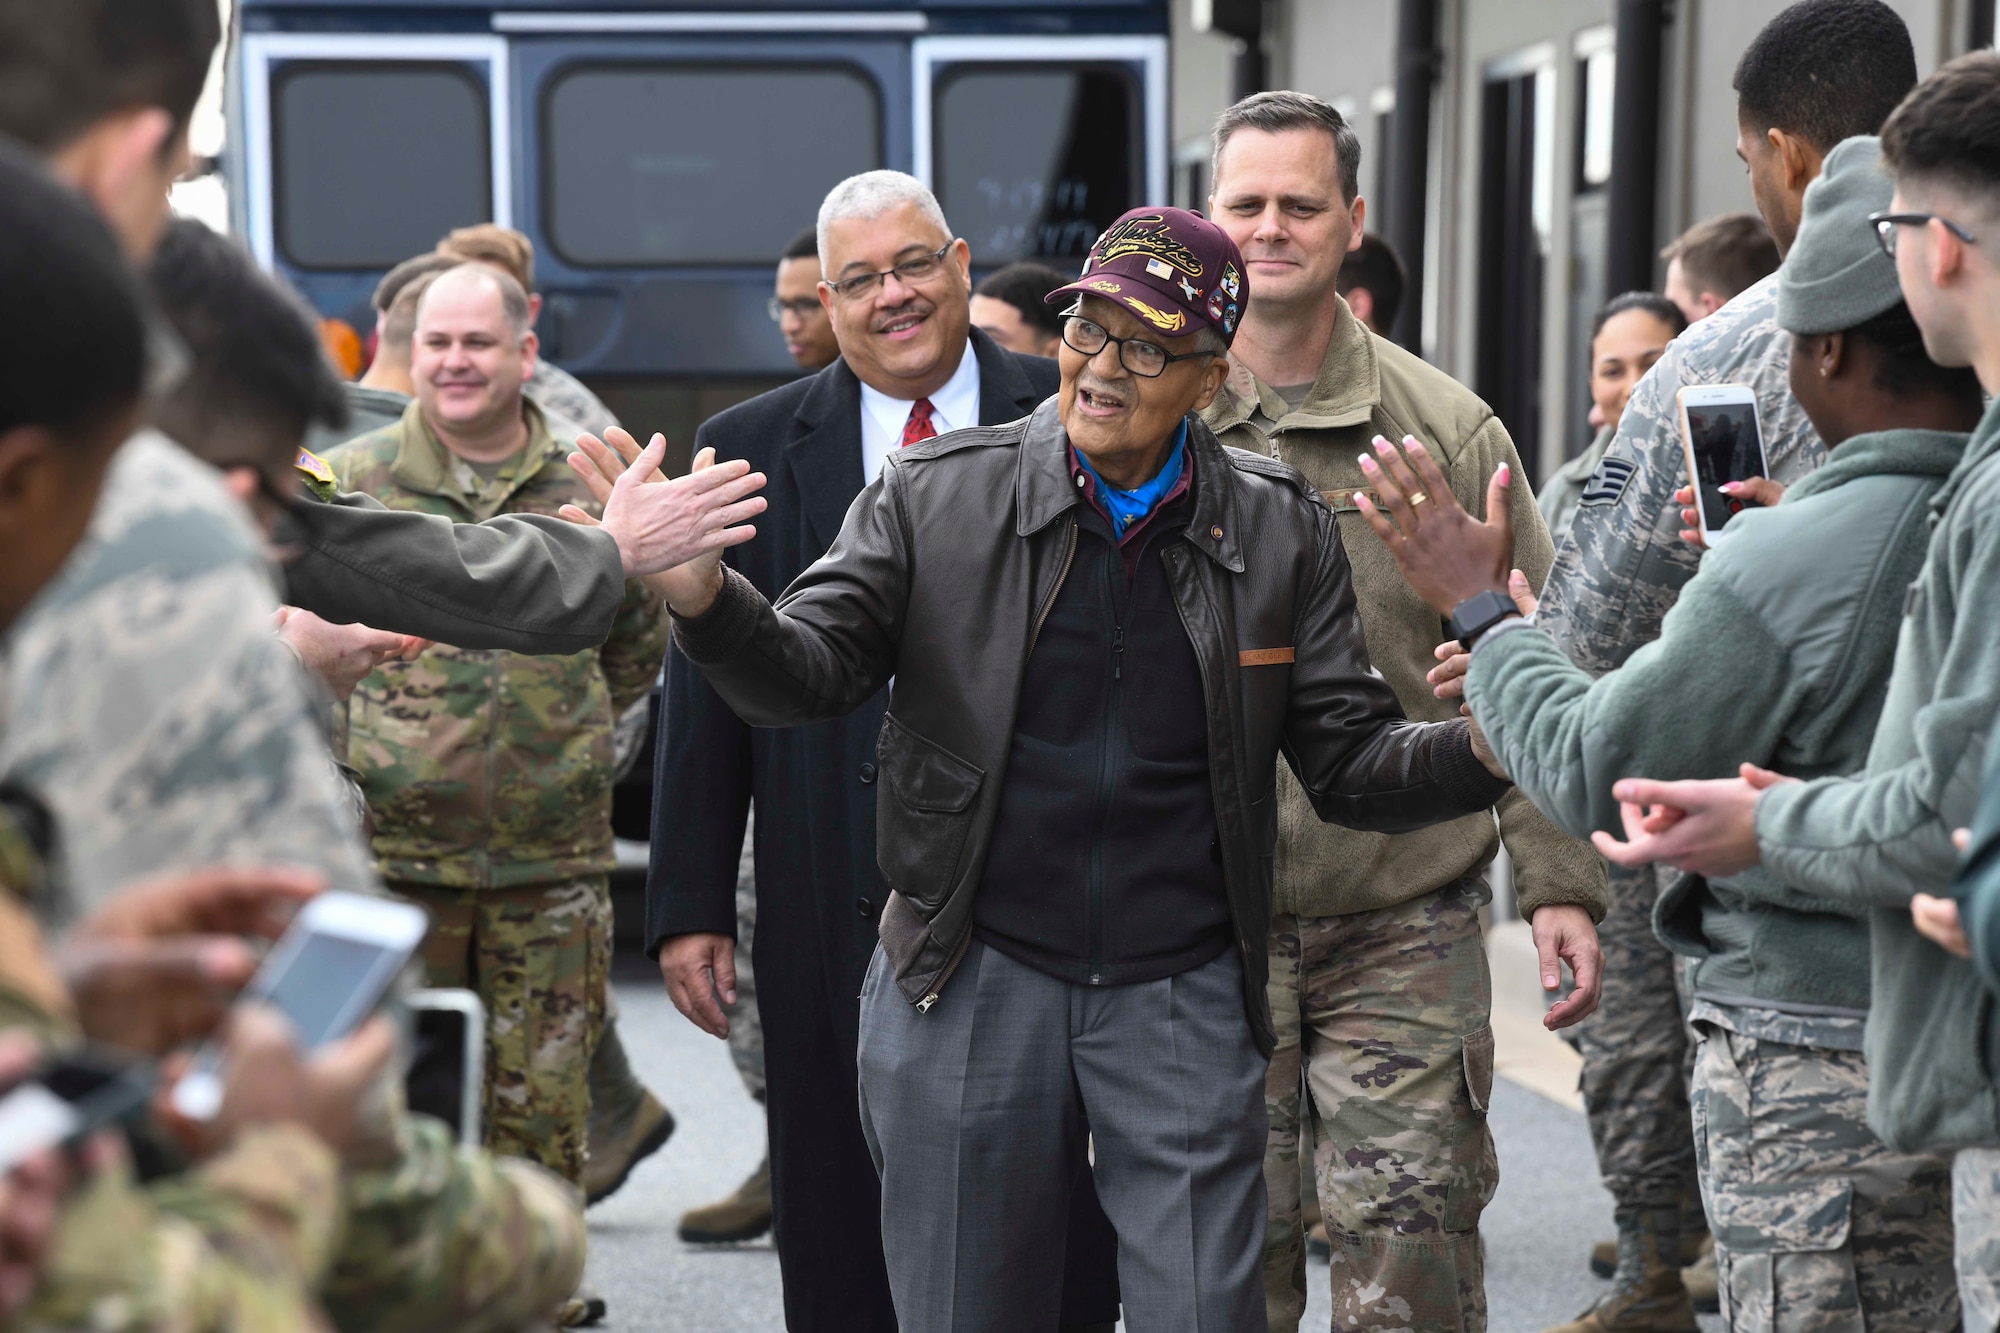 Retired Col. Charles McGee, one of the Tuskegee Airmen, high-fives Airmen during his visit Dec. 6, 2019, at Dover Air Force Base, Del. McGee served a total of 30 years in the U.S. Air Force, beginning with the U.S. Army Air Corps, and flew a total of 409 combat missions in World War II, the Korean War and the Vietnam War. The Tuskegee Airmen were the first African-American military aviators in the U.S. Army Air Corps. (U.S. Air Force photo by Senior Airman Christopher Quail)